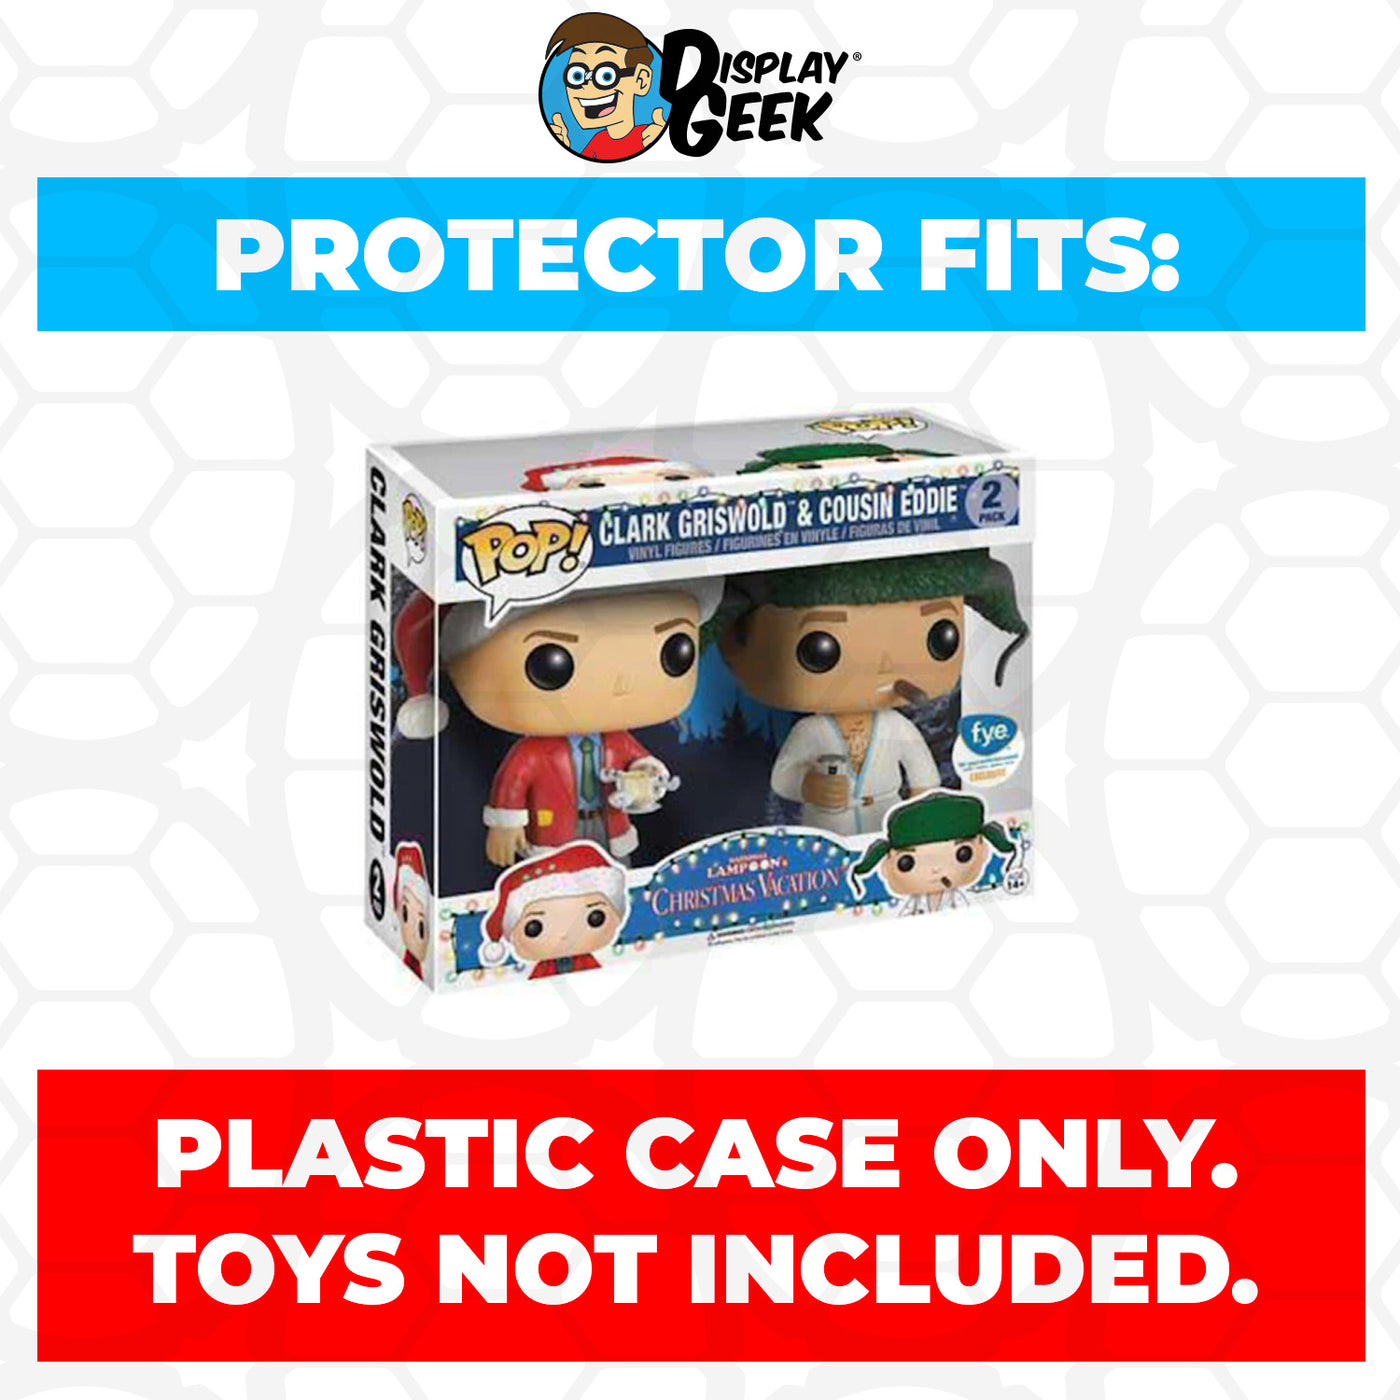 Pop Protector for 2 Pack Clark Griswold & Cousin Eddie Funko Pop on The Protector Guide App by Display Geek